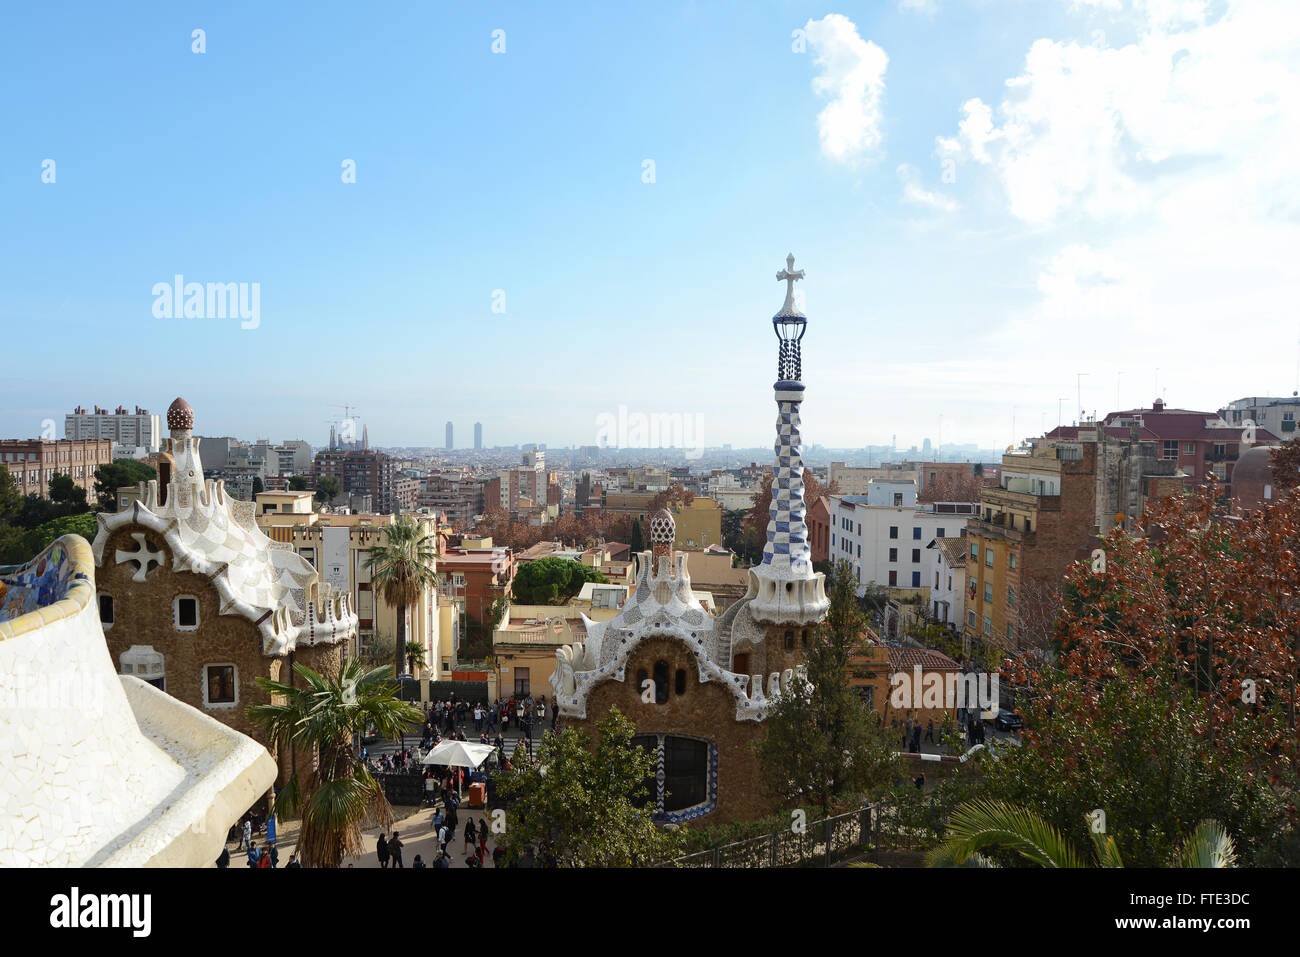 Barcelona, Spain - December 28, 2015: View over city from the Square Park Guell Barcelona, Catalunya, Spain Stock Photo